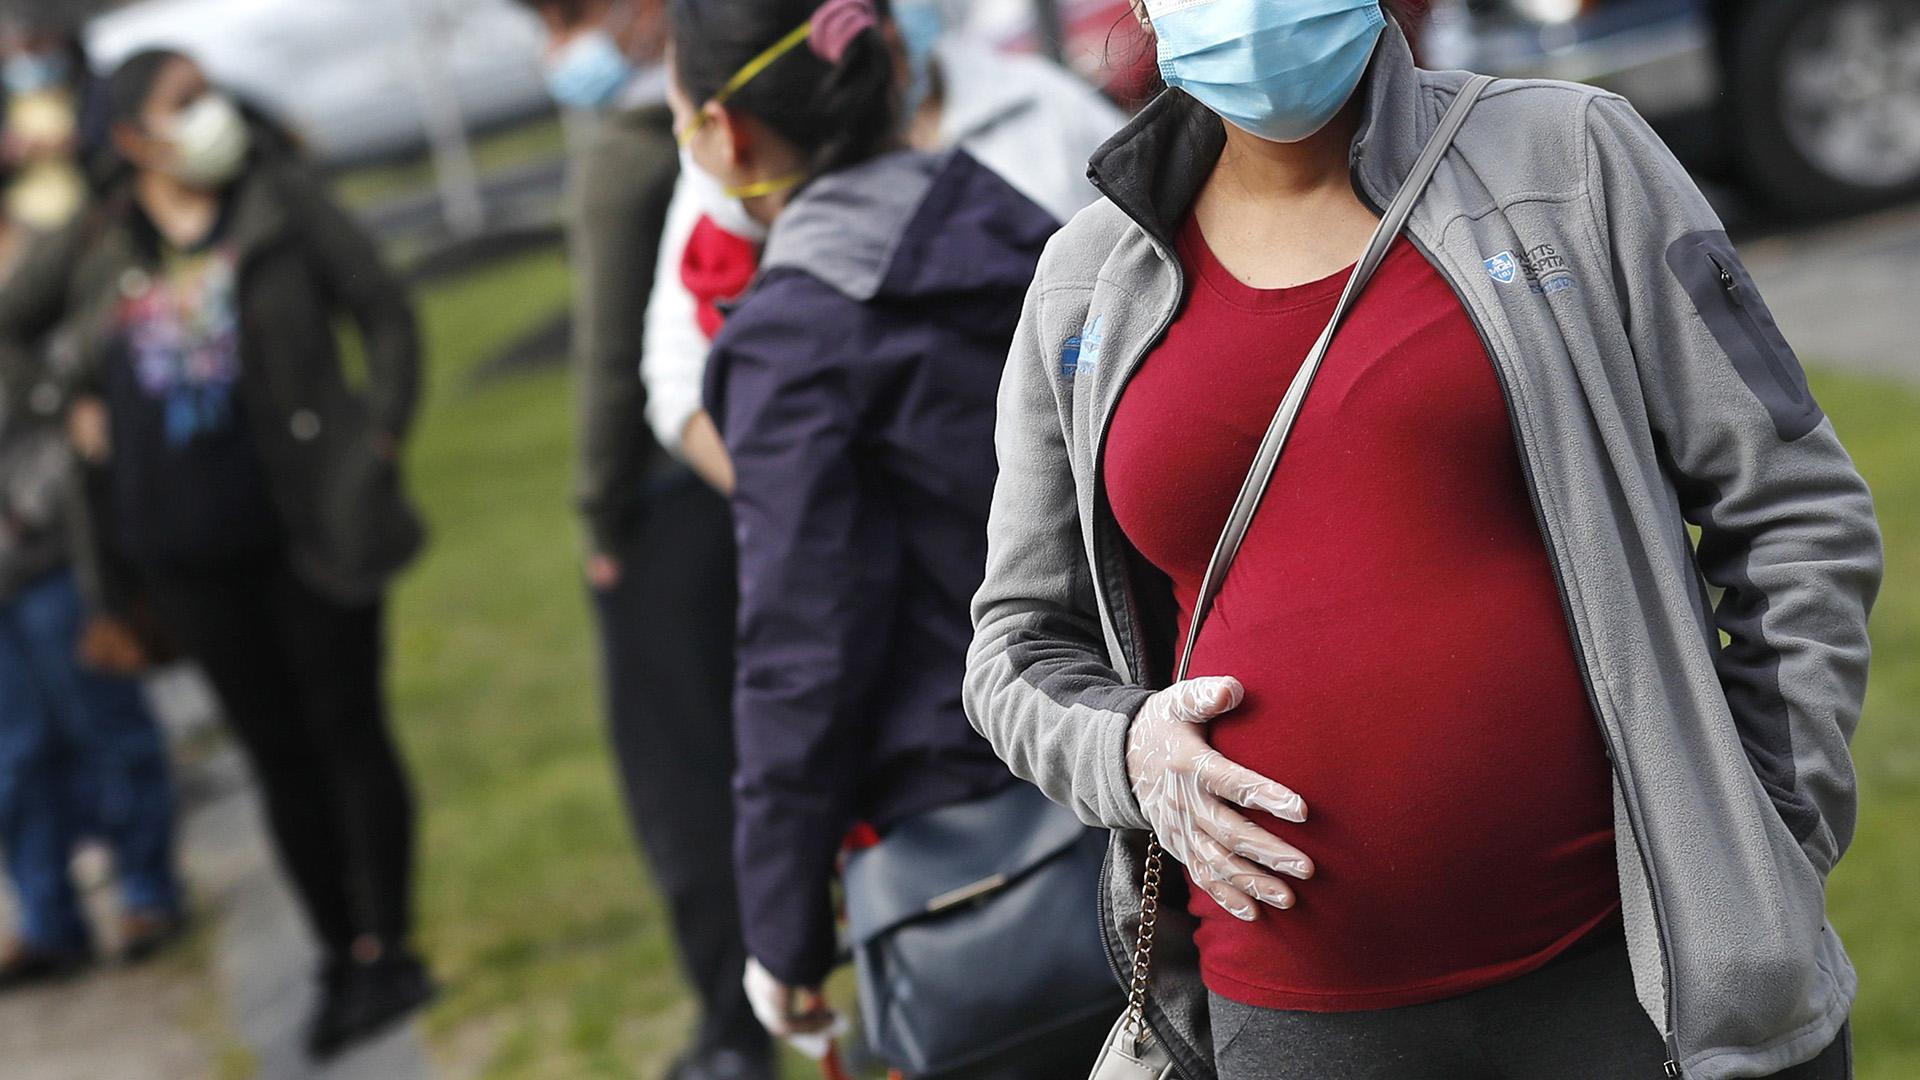 In this Thursday, May 7, 2020 file photo, a pregnant woman wearing a face mask and gloves holds her belly as she waits in line for groceries with hundreds during a food pantry sponsored by Healthy Waltham for those in need due to the COVID-19 virus outbreak, at St. Mary's Church in Waltham, Mass. (AP Photo / Charles Krupa)